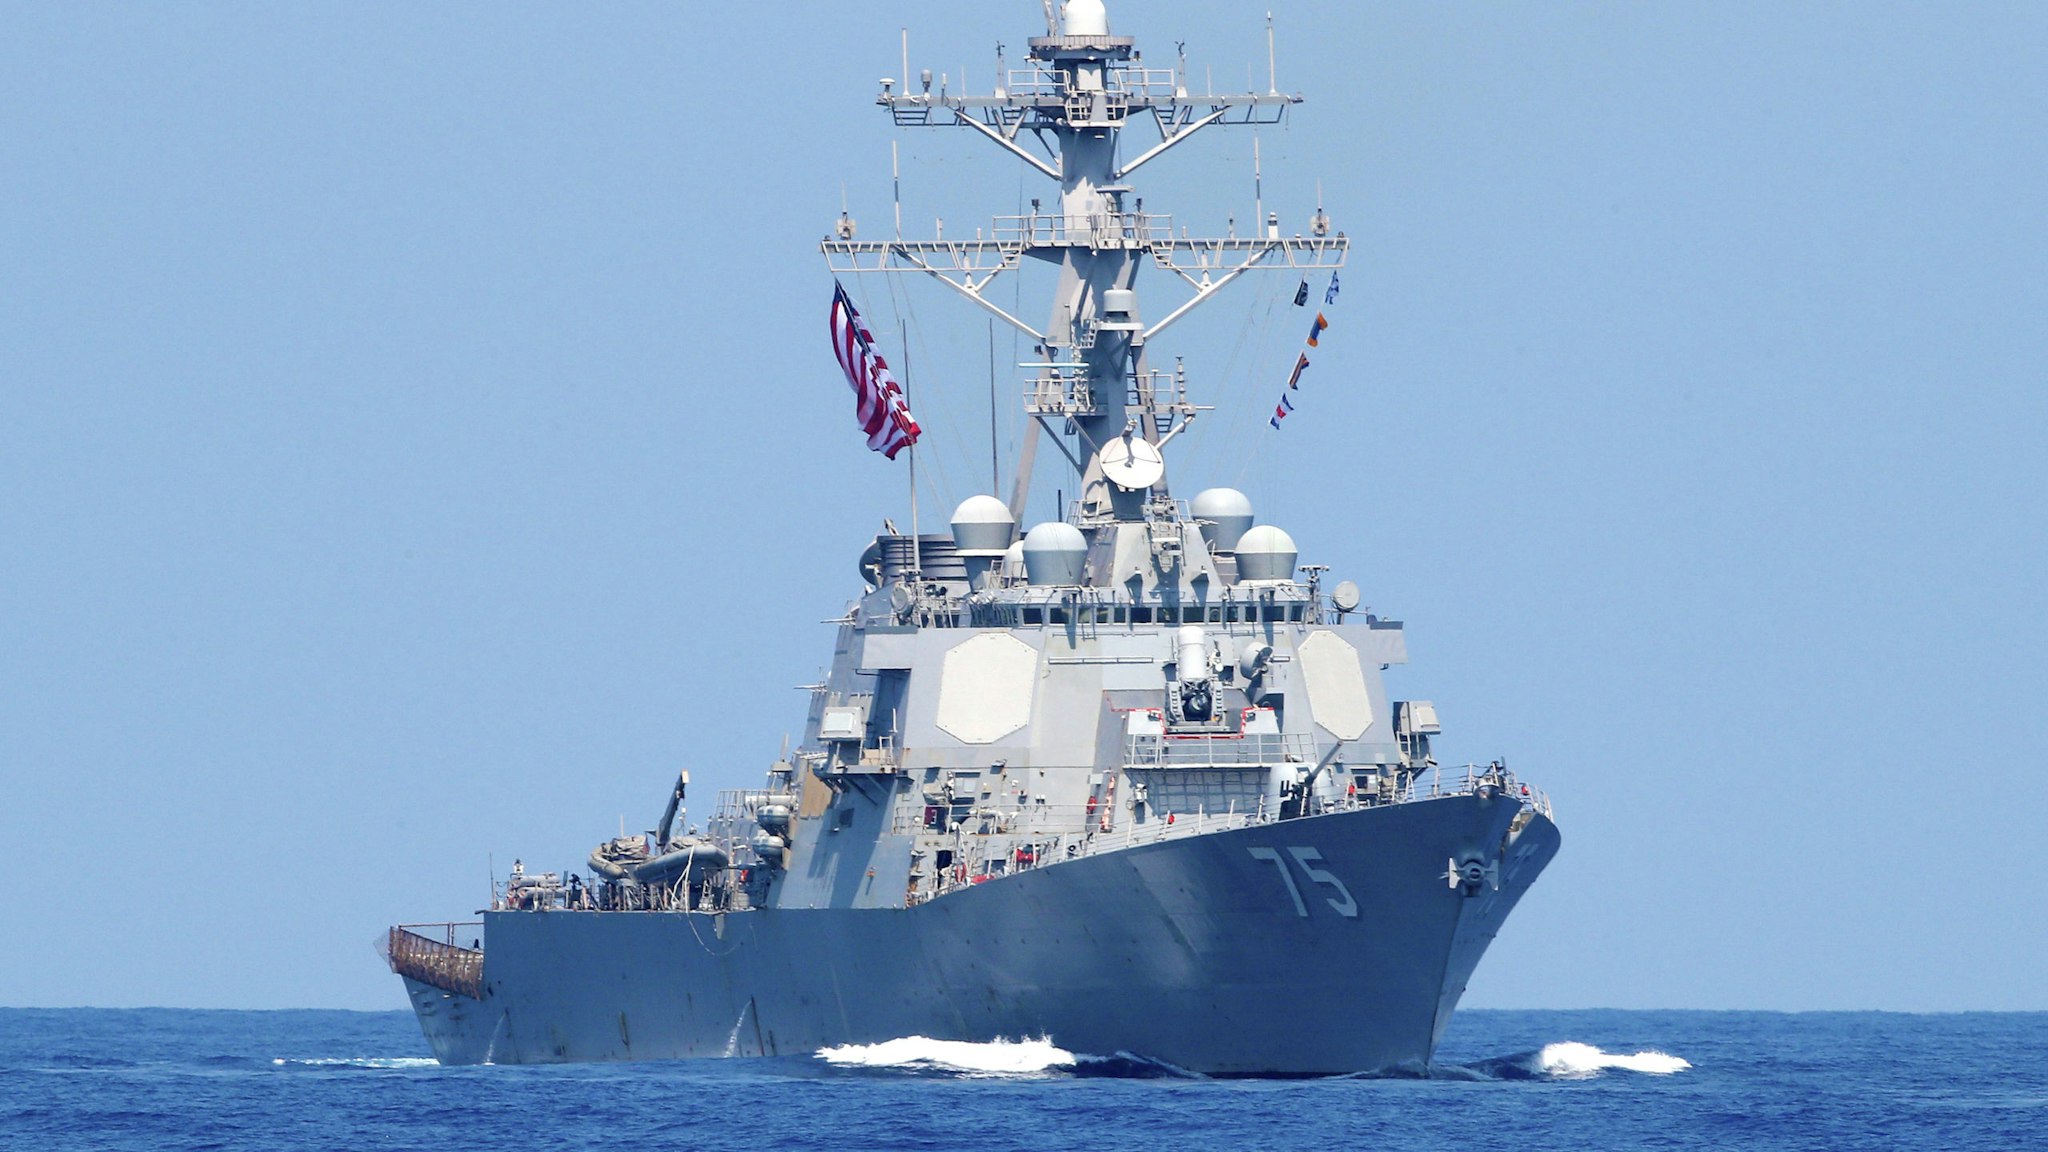 A photo taken on August 7, 2019, shows the US Navy USS Donald Cook class guided missile destroyer during an exercise how simulate a humanitarian response to a powerful earthquake and significant movement of IDF vessels and foreign vessels in the Mediterranean sea. - Sailors from France, Greece and the United States arrived on their vessels and were joined by the Israelis off the Israeli port city of Haifa for a four-day exercise, called "Mighty Waves". It simulated extracting wounded civilians to sea for treatment, fishing people out of the water and transferring humanitarian aid, with representatives of seven other navies taking part as observers.